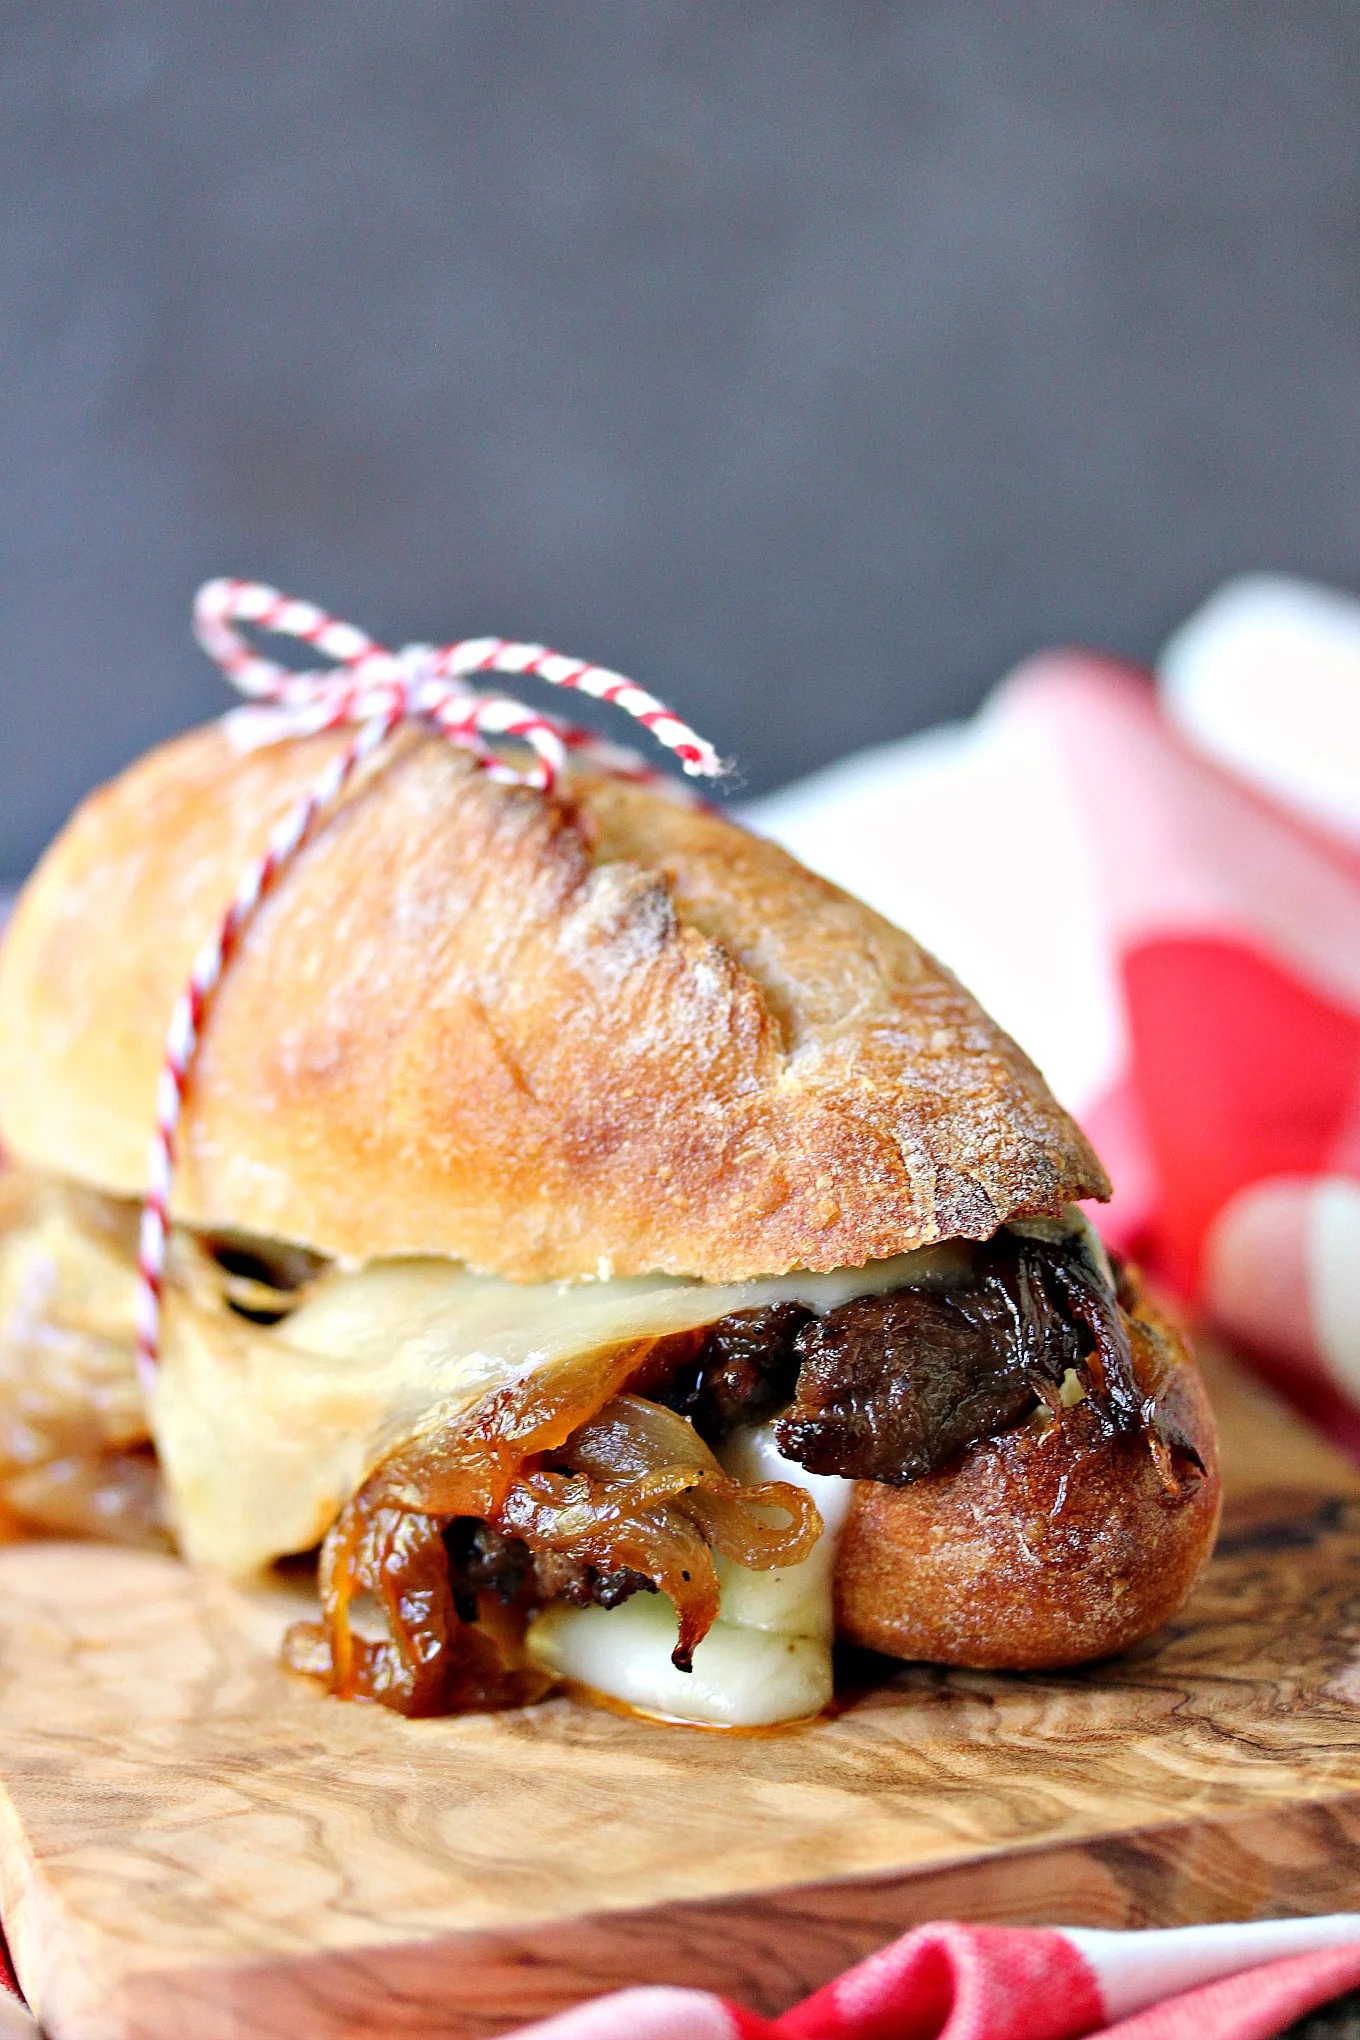 STEAK SANDWICHES WITH CARAMELIZED ONIONS AND PROVOLONE CHEESE